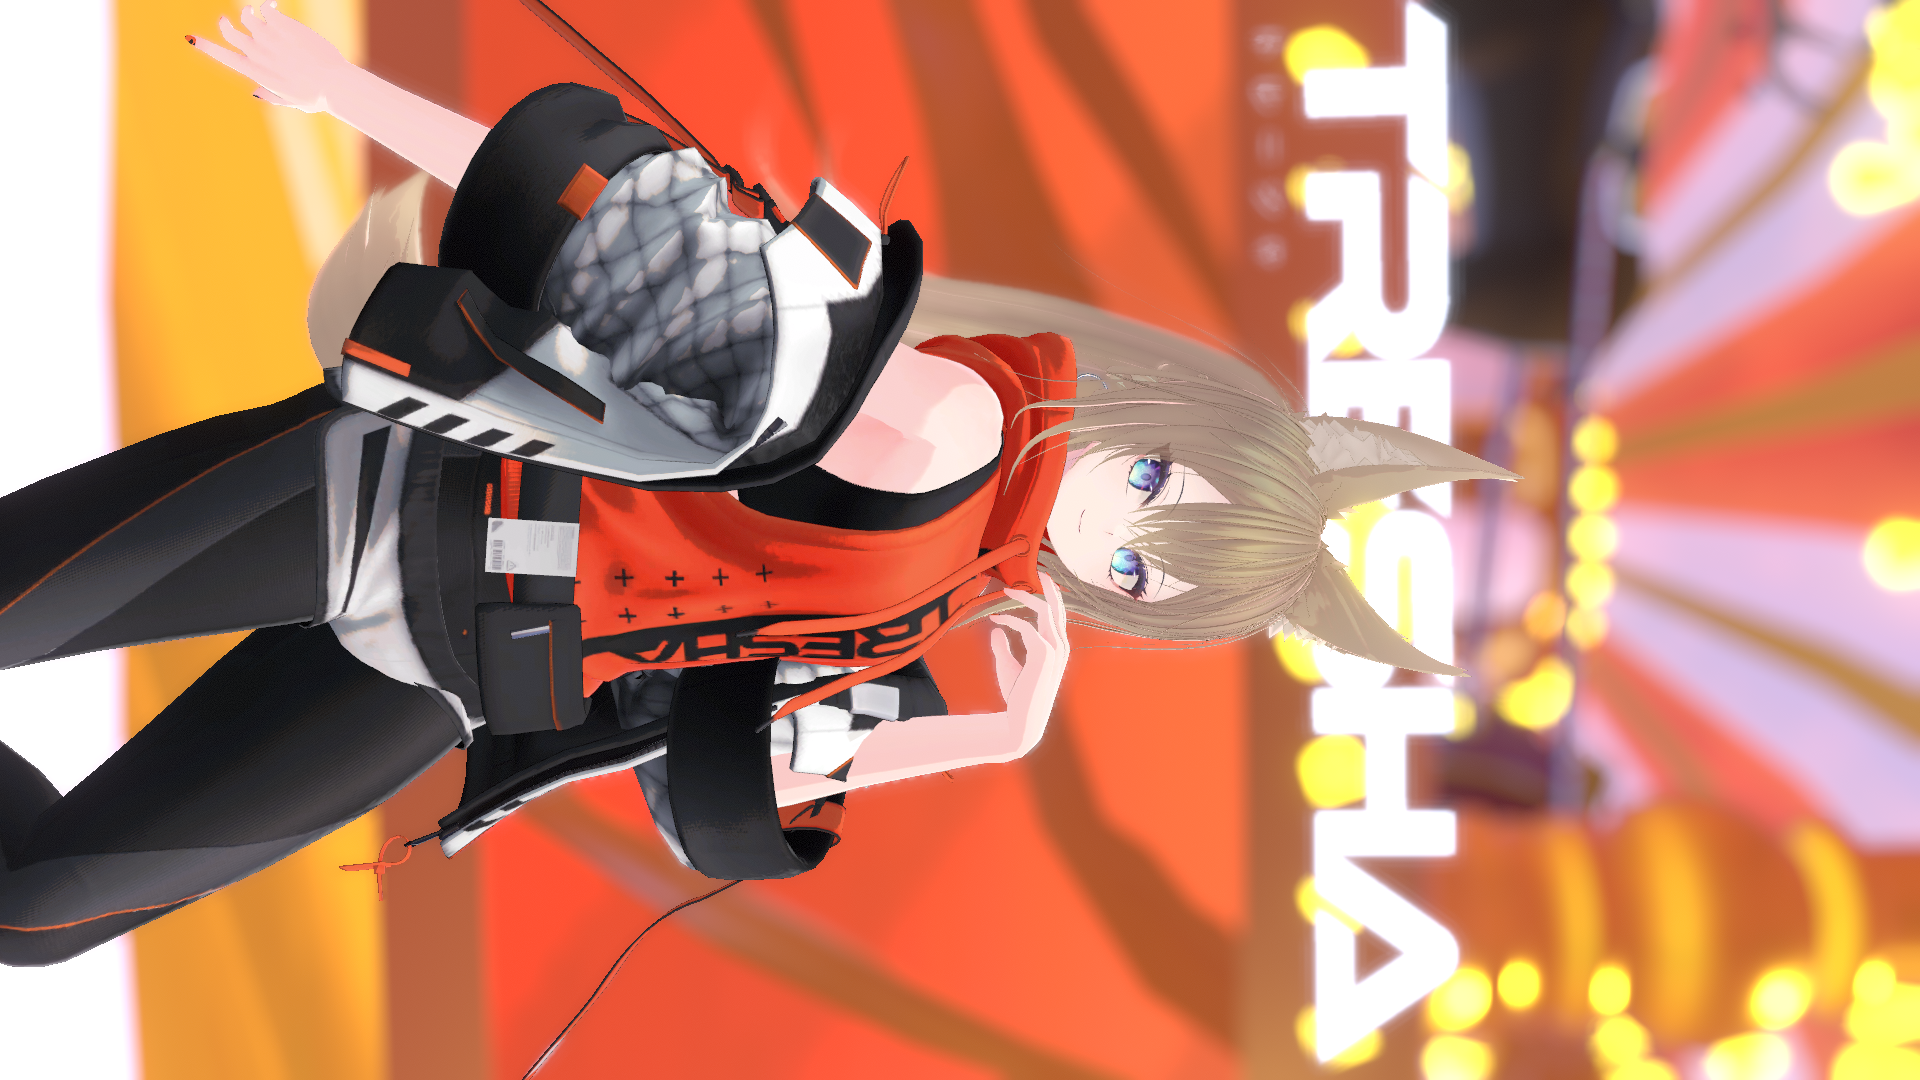 VRChat_1920x1080_2021-12-05_05-11-42.993.png